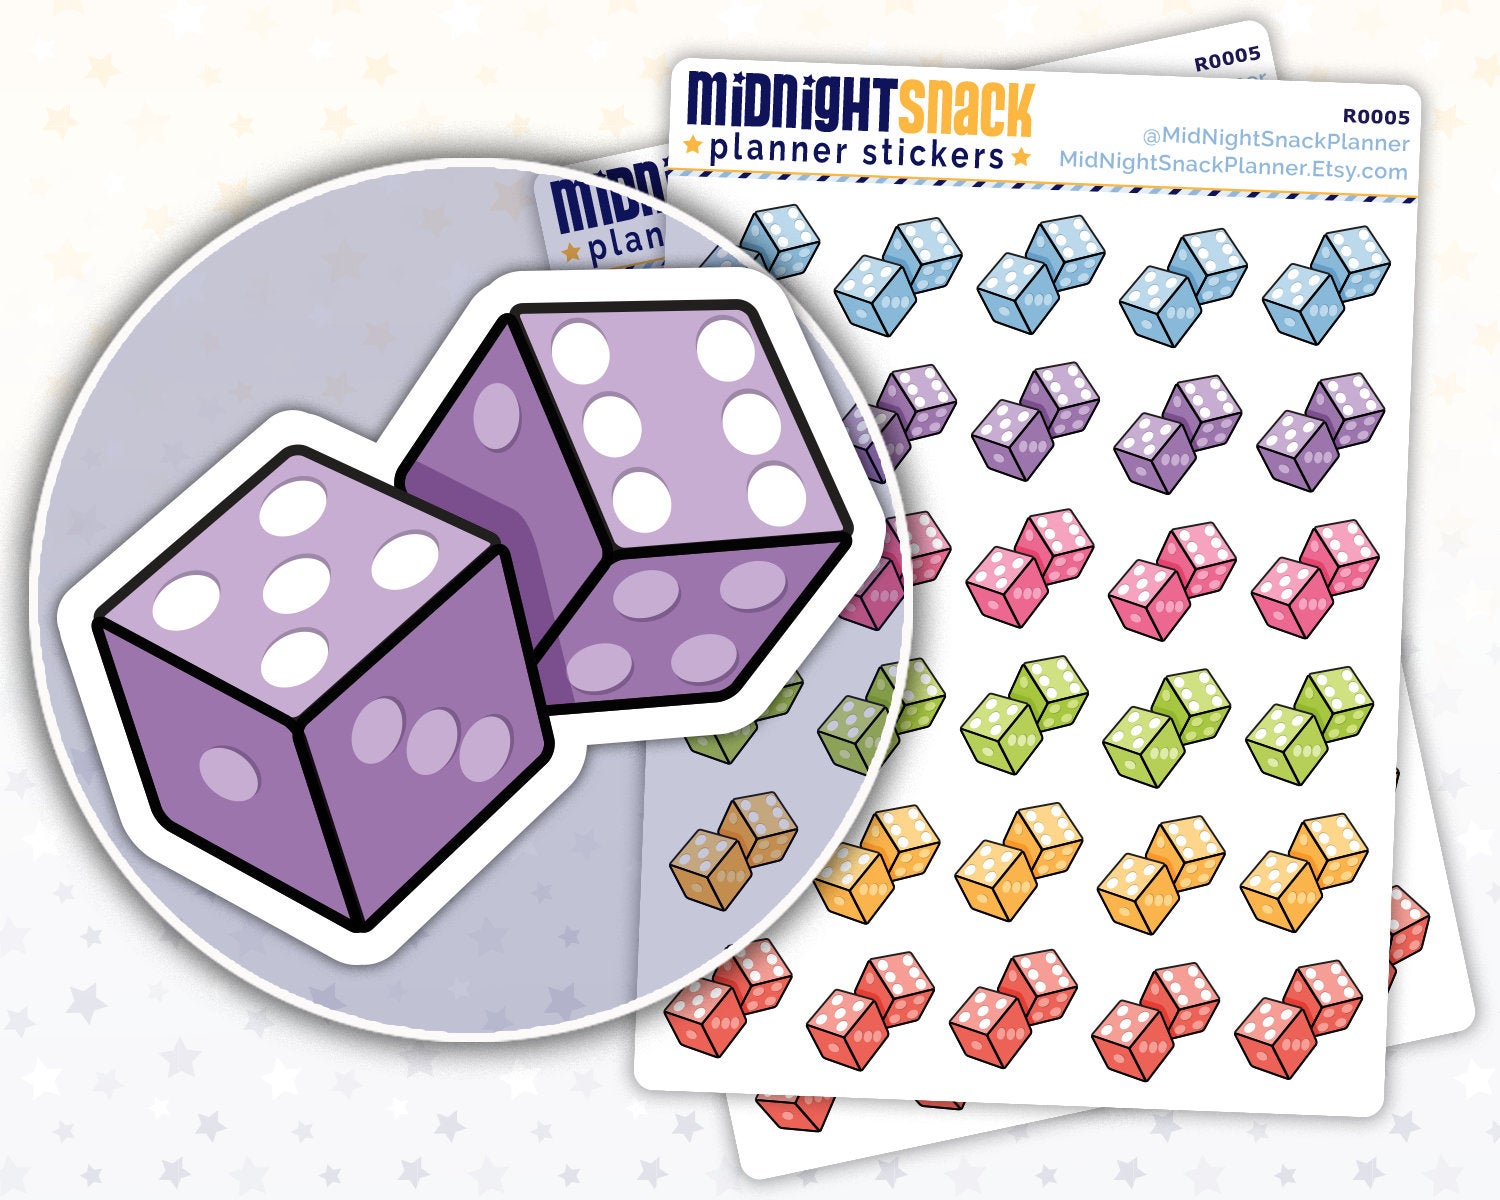 Dice Icon: Fun and Games Planner Stickers Midnight Snack Planner